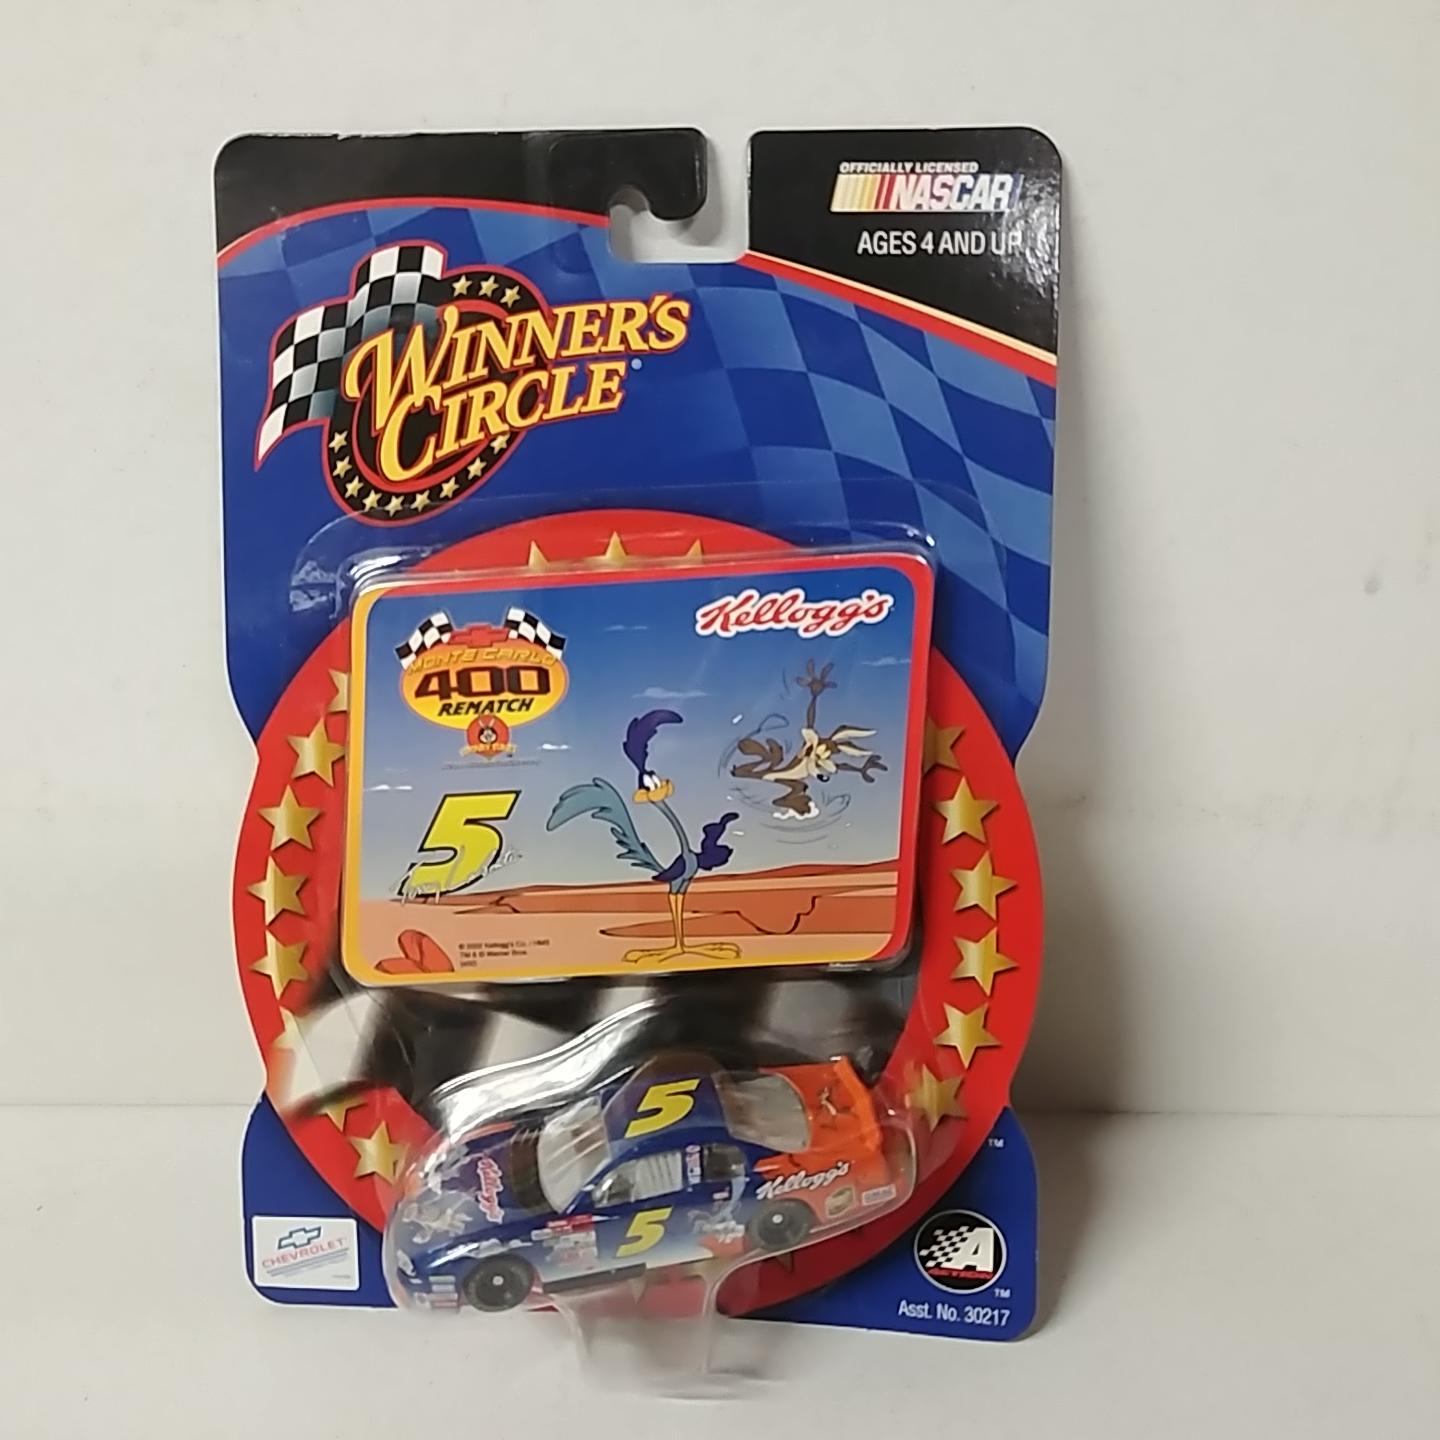 2003 Terry Labonte 1/64th Kelloggs/Looney Tunes Rematch "Road Runner" car